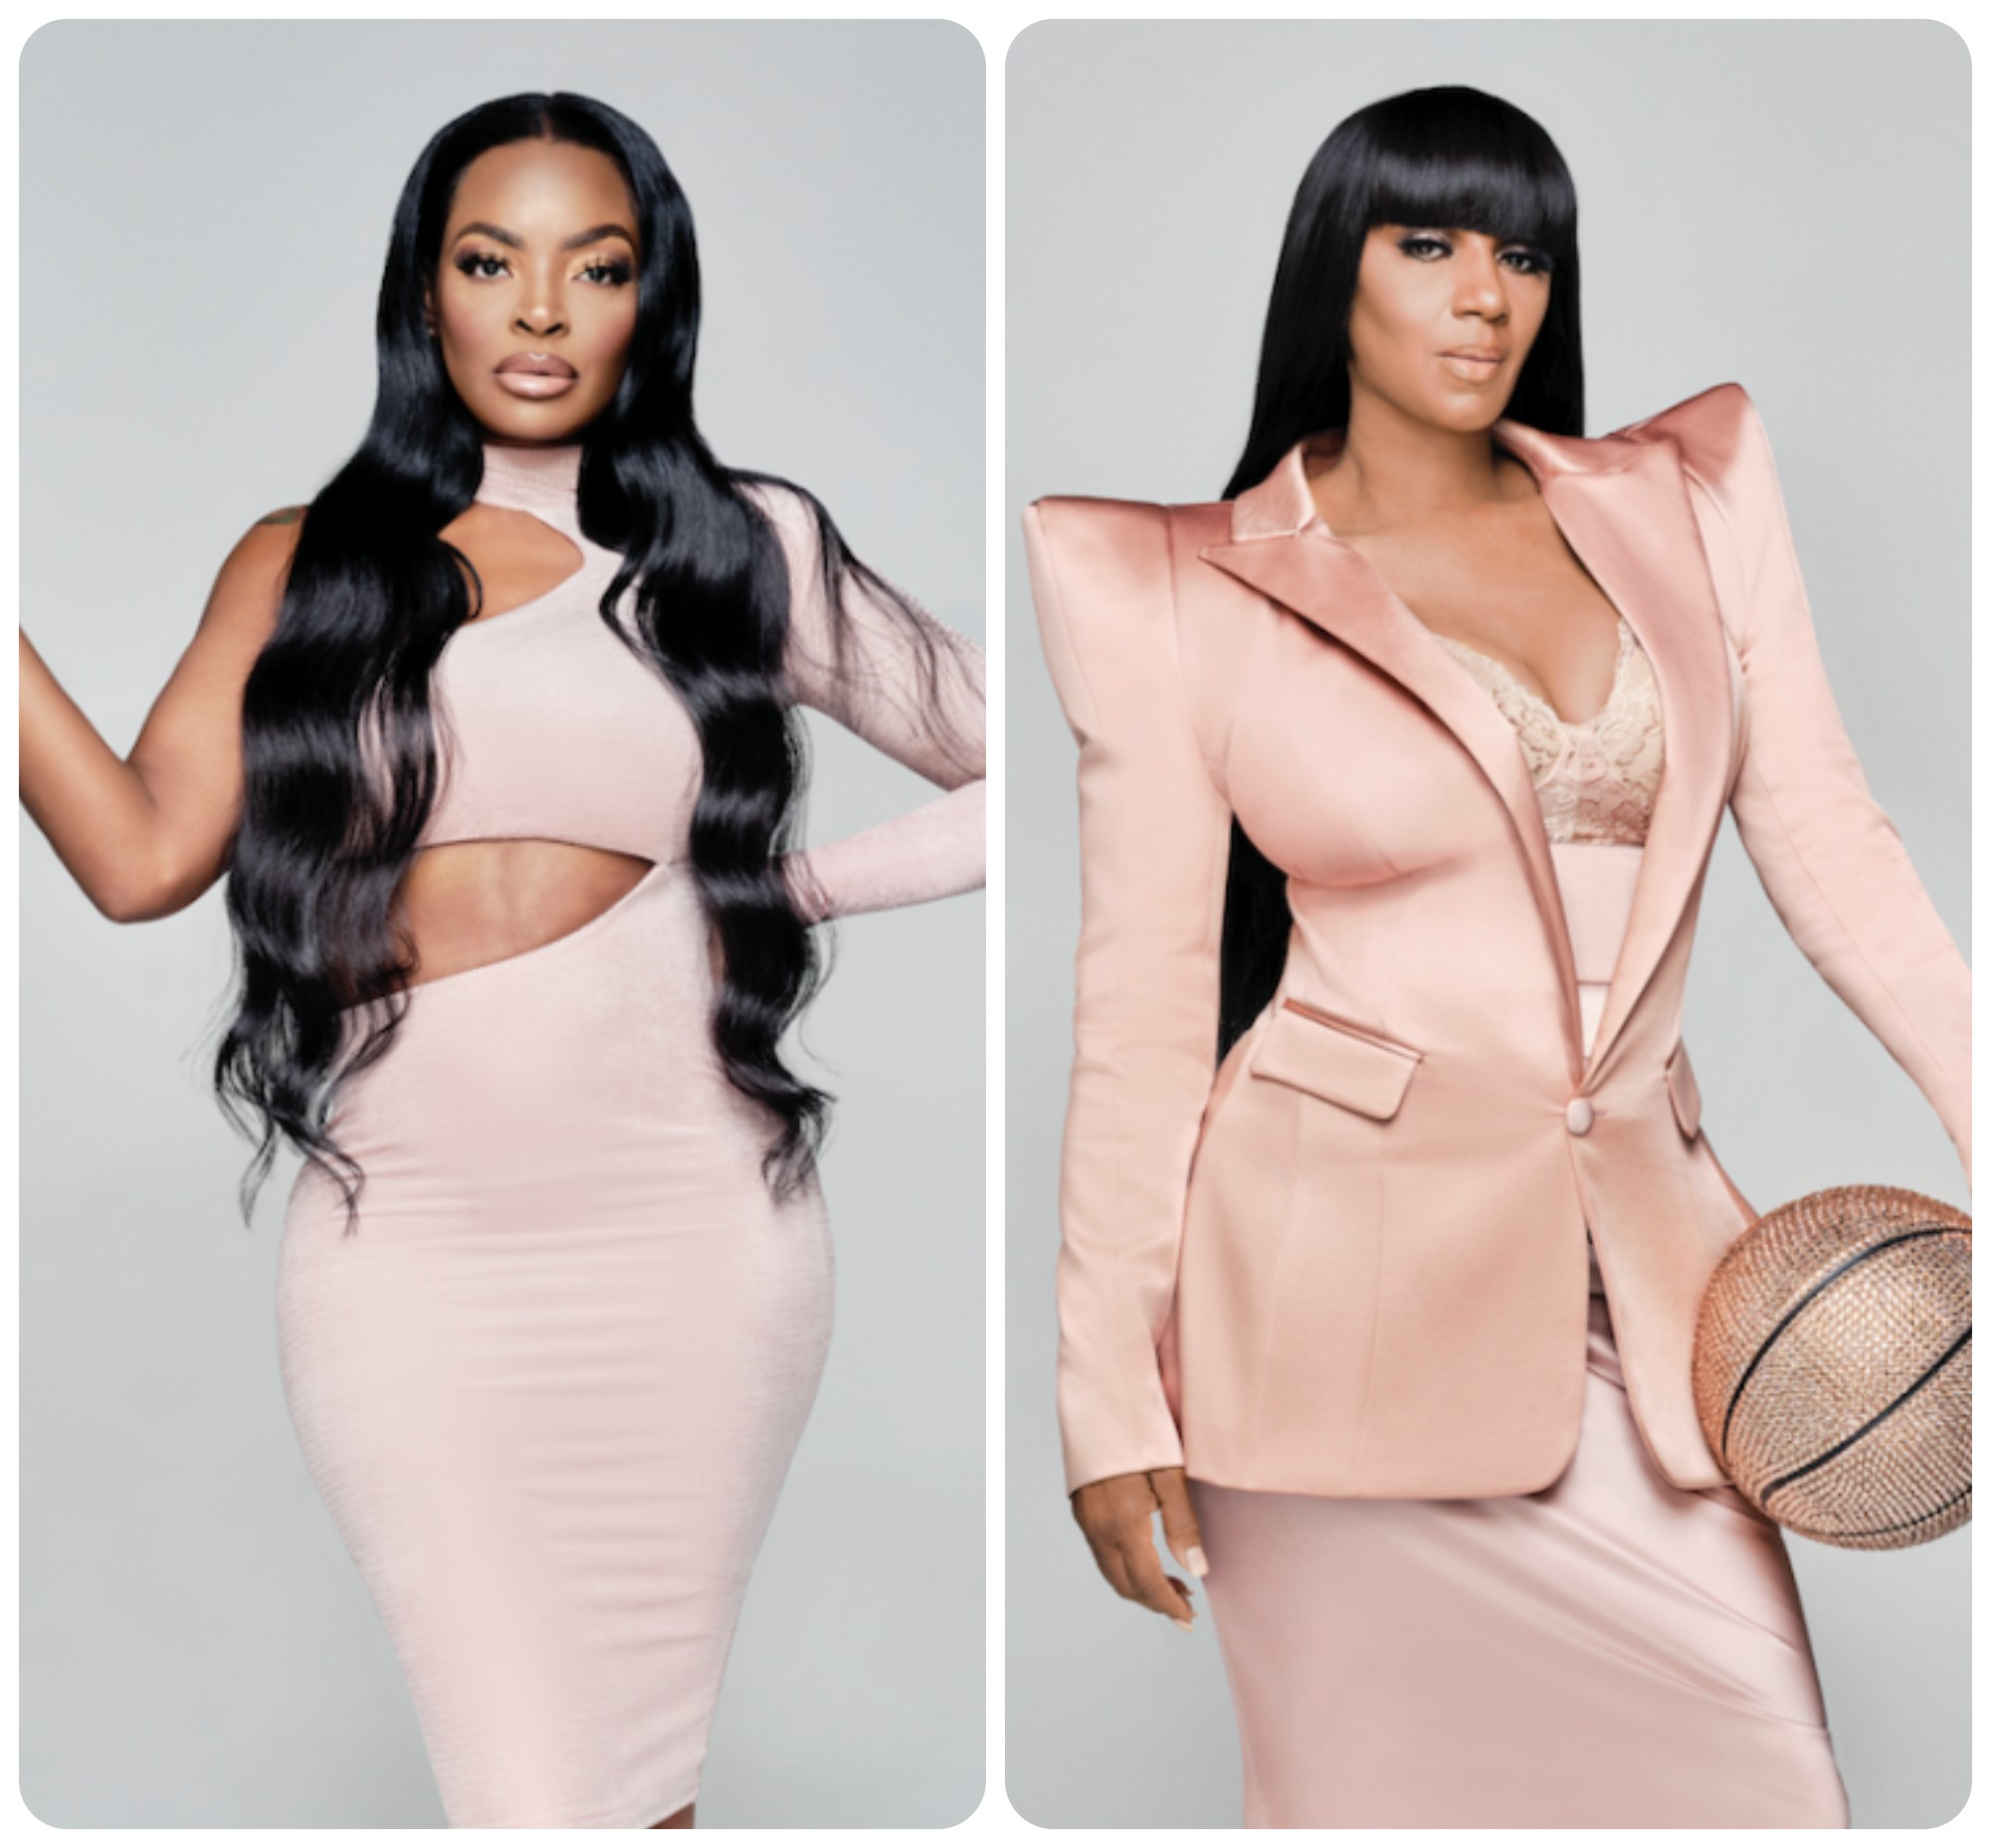 Basketball Wives' star Jackie Christie on dealing with NBA